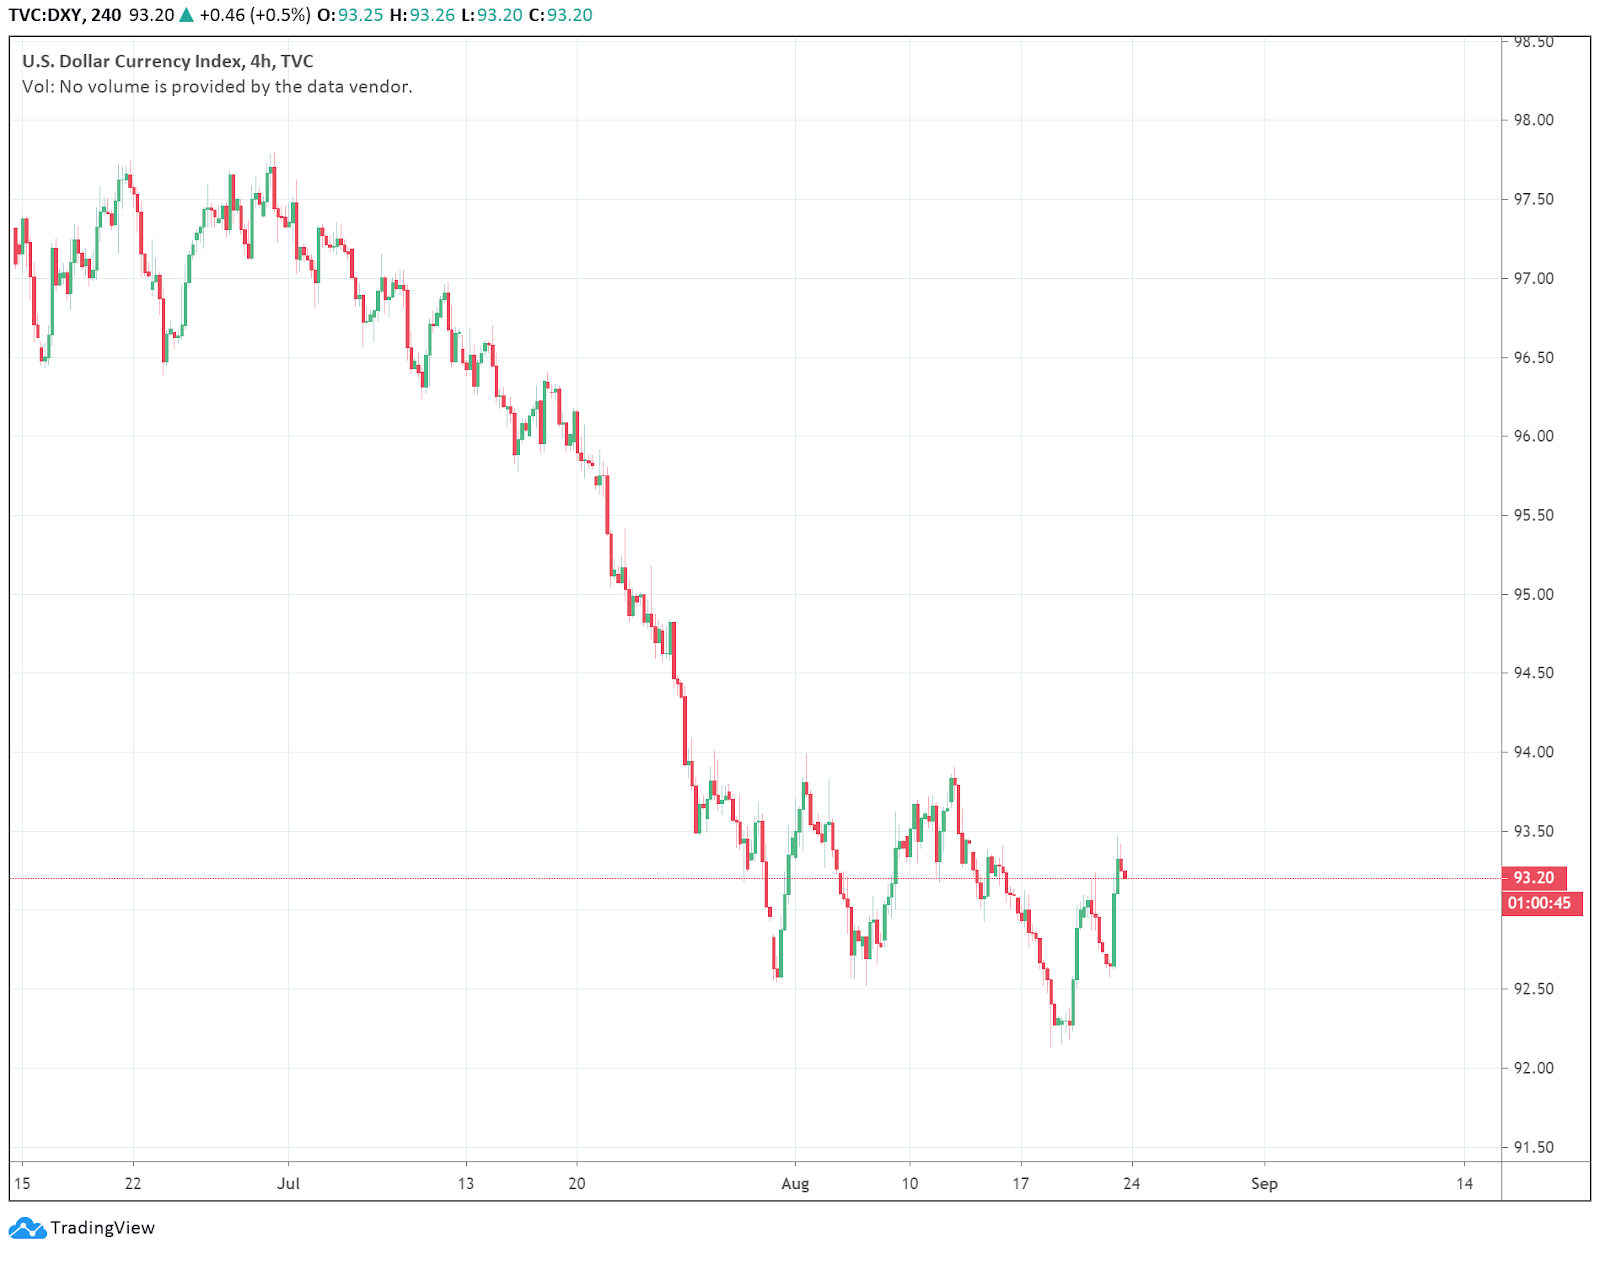 The US Dollar Index shows signs of a recovery. Source: TradingView.com